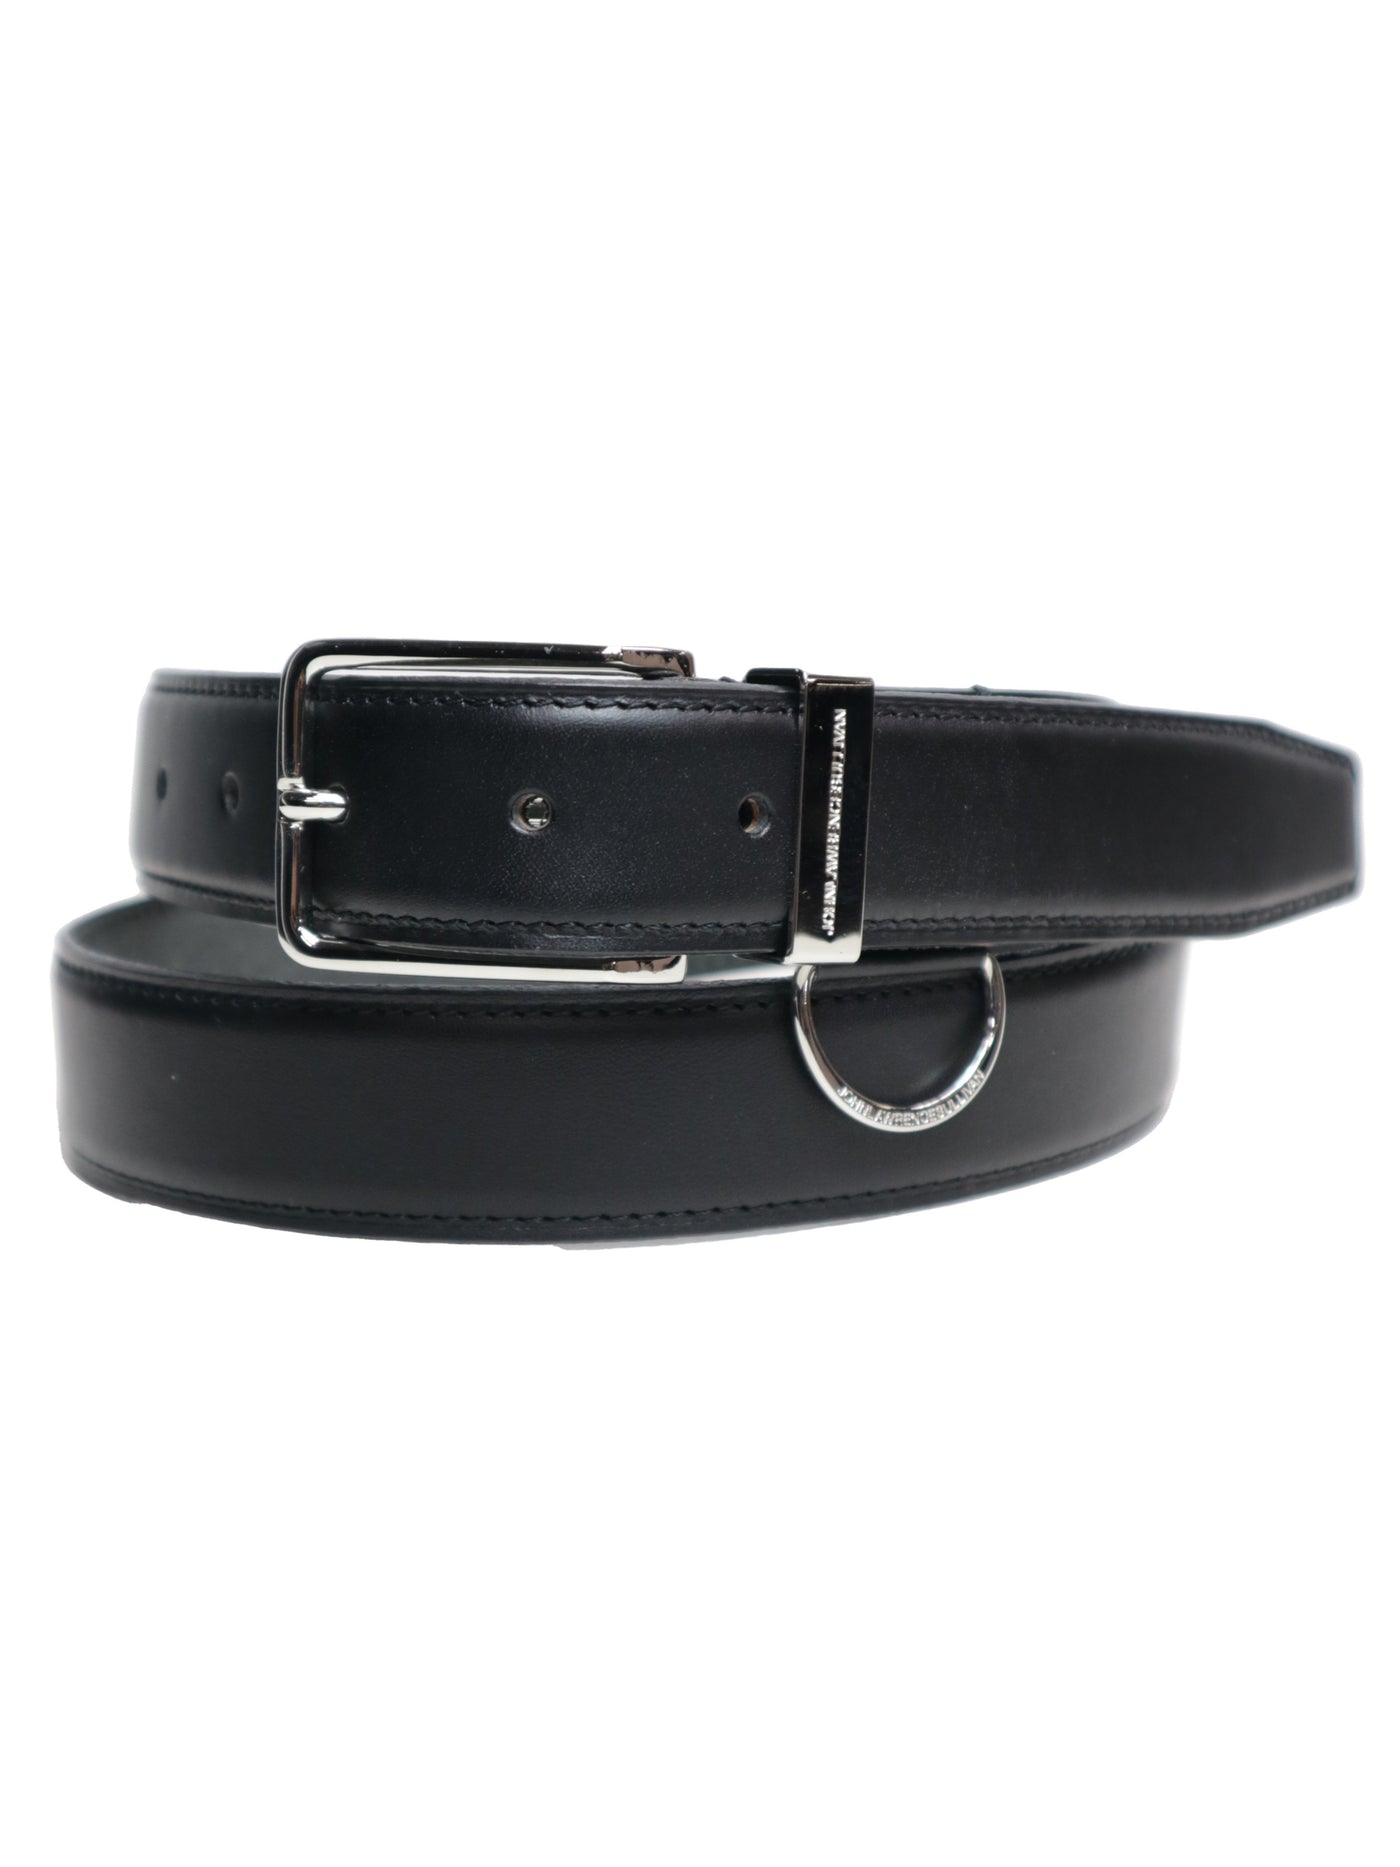 Pin buckle belt with d-ring